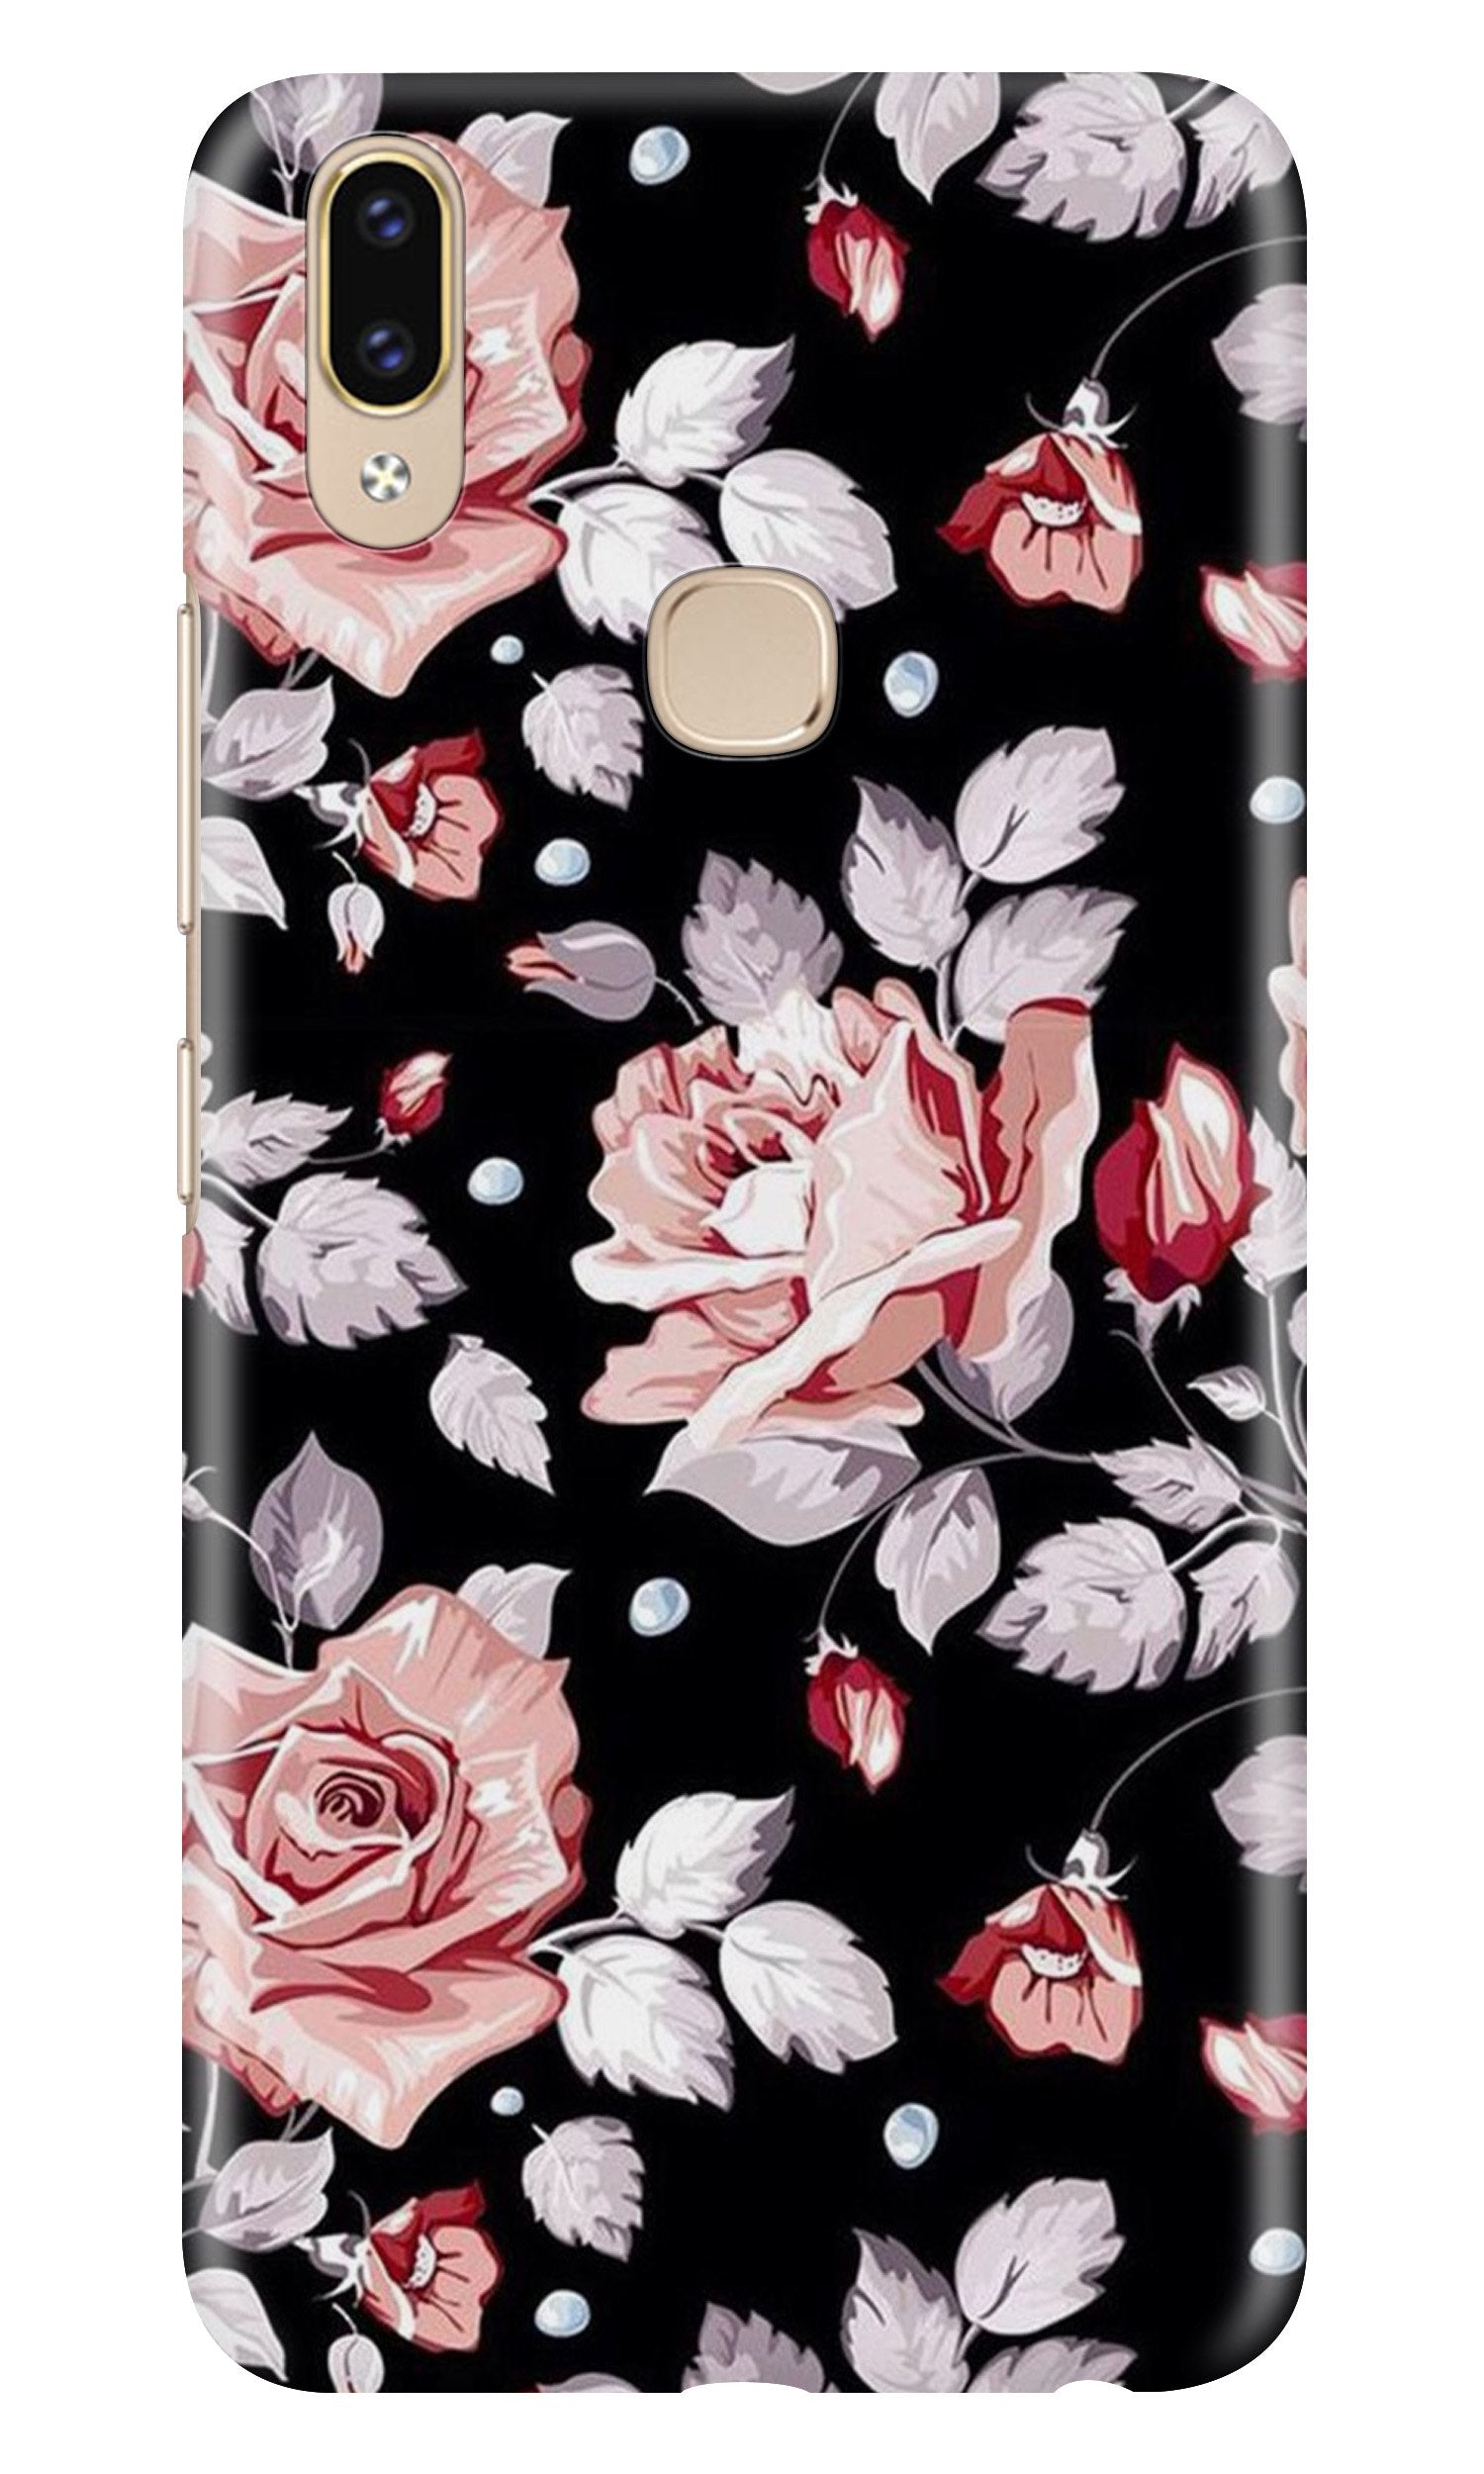 Pink rose Case for Asus Zenfone Max M2